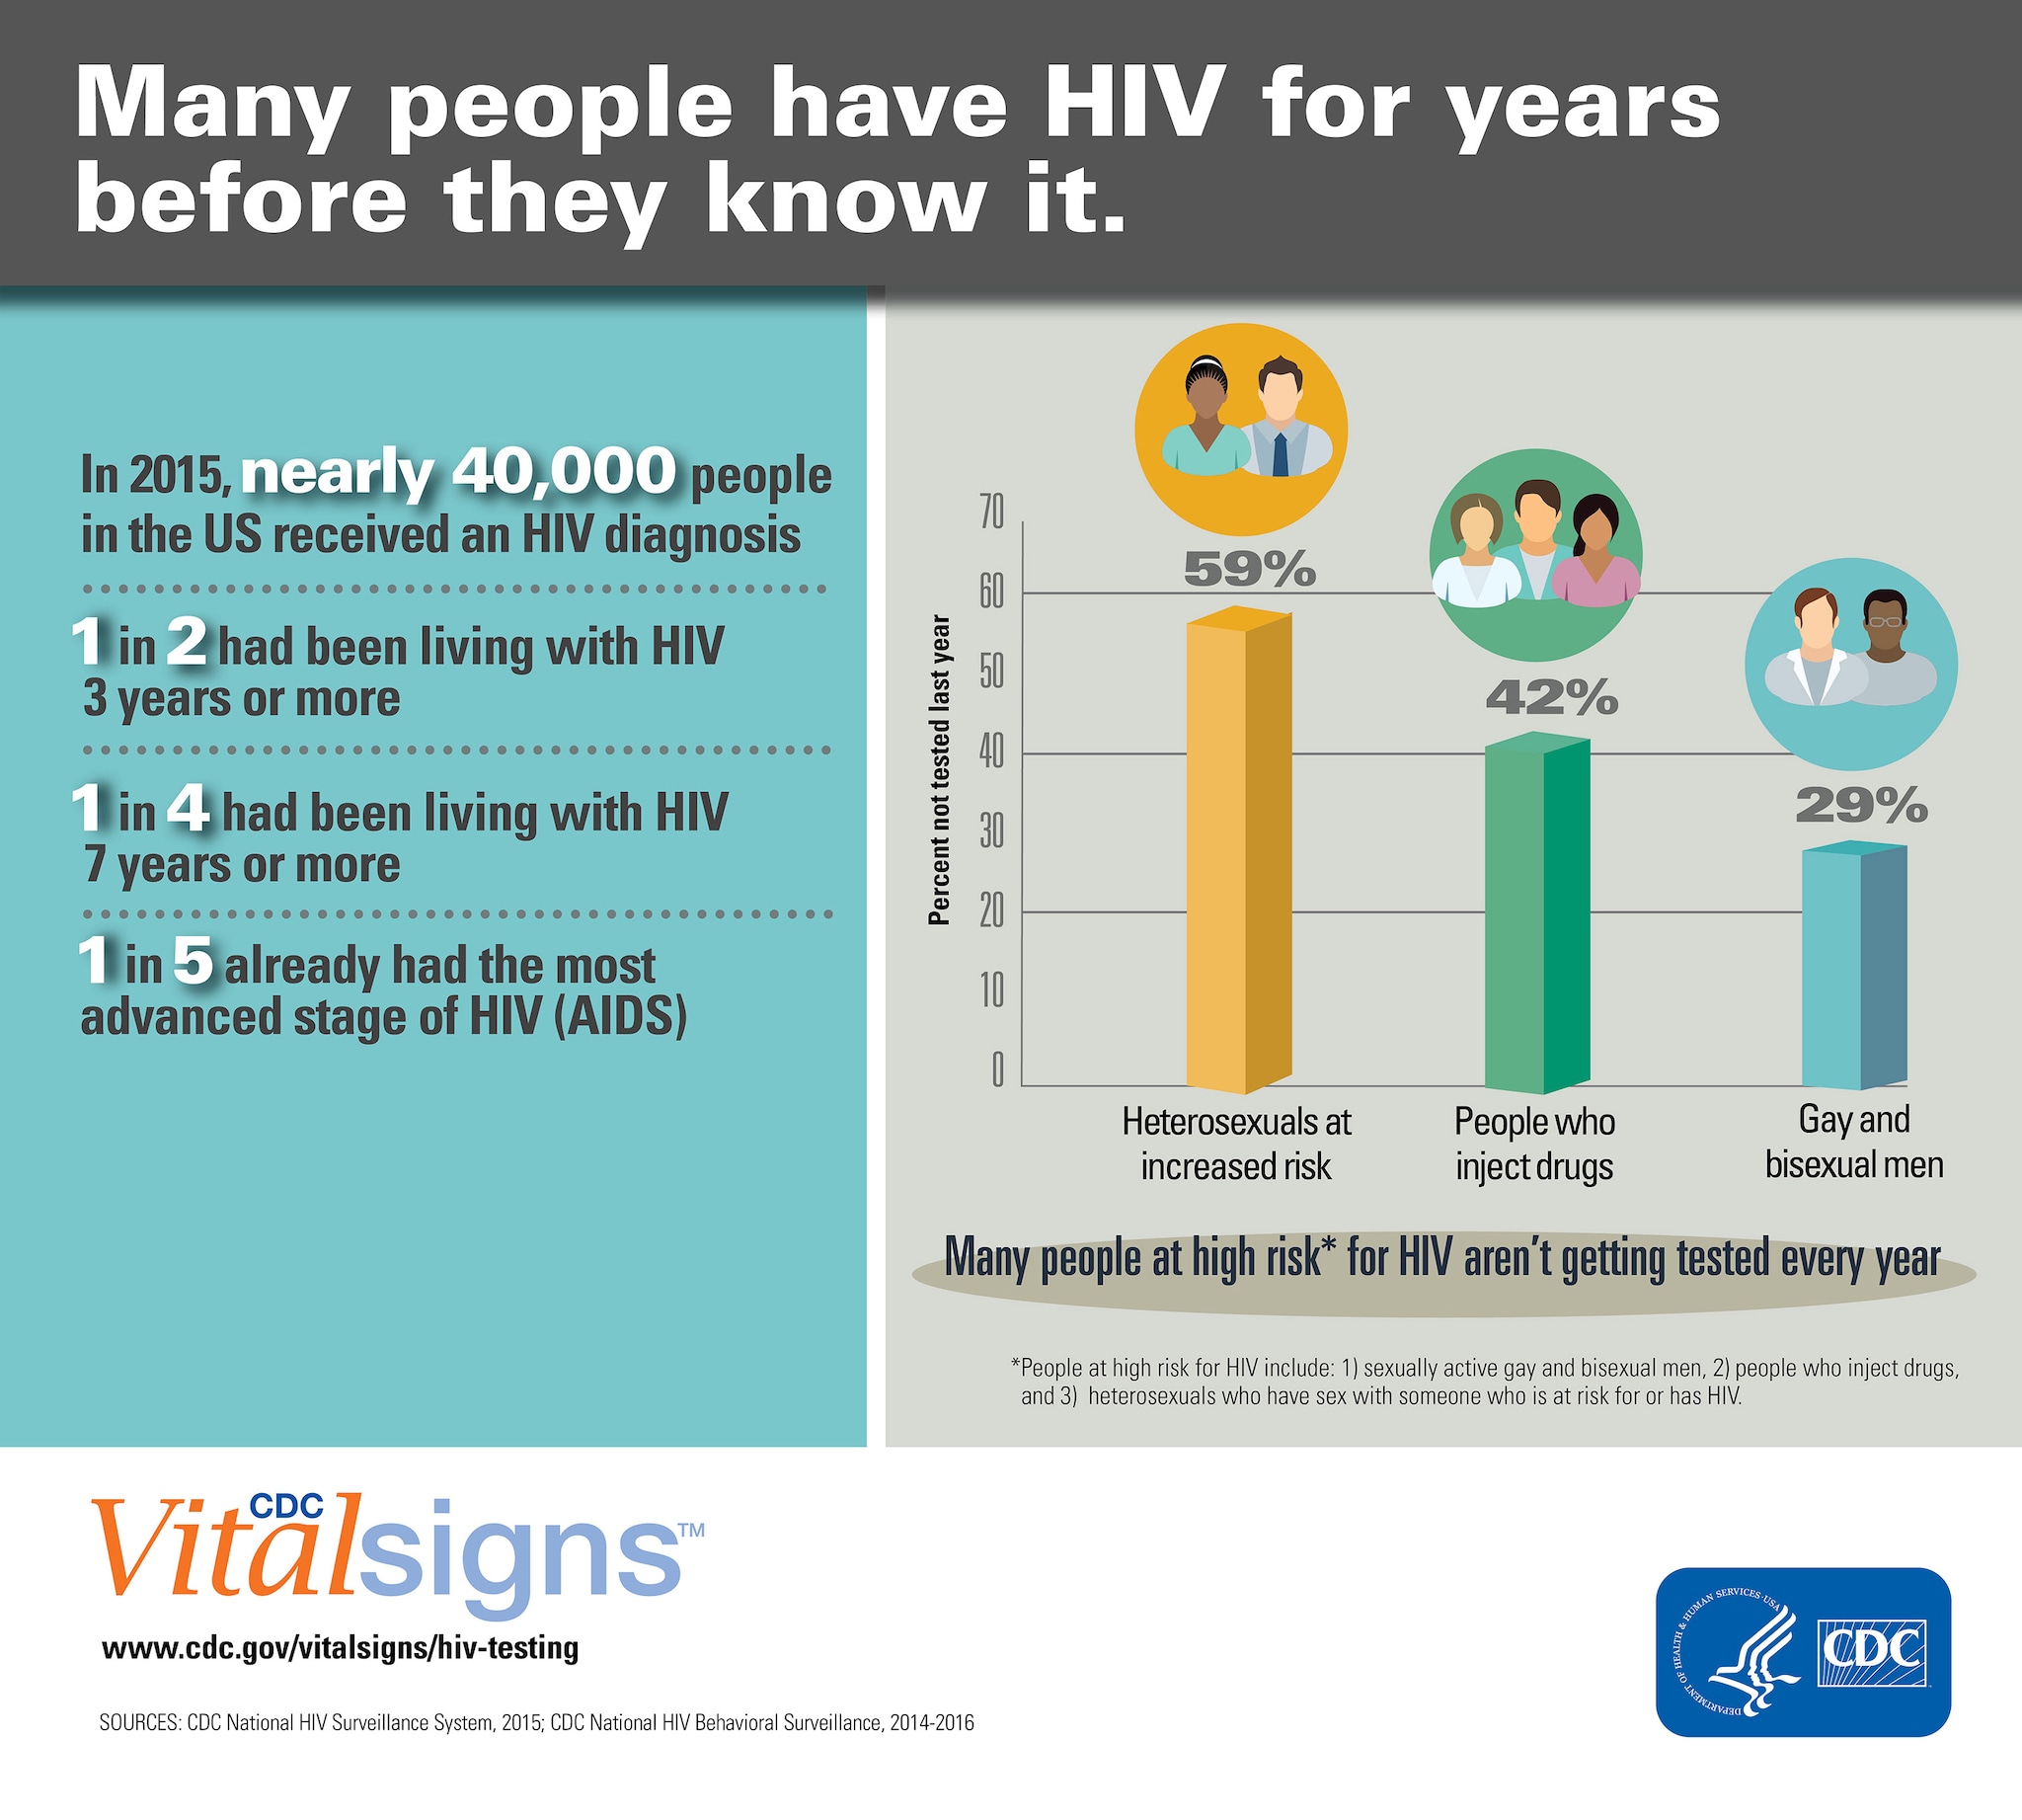 Many people have HIV for years before they know it.